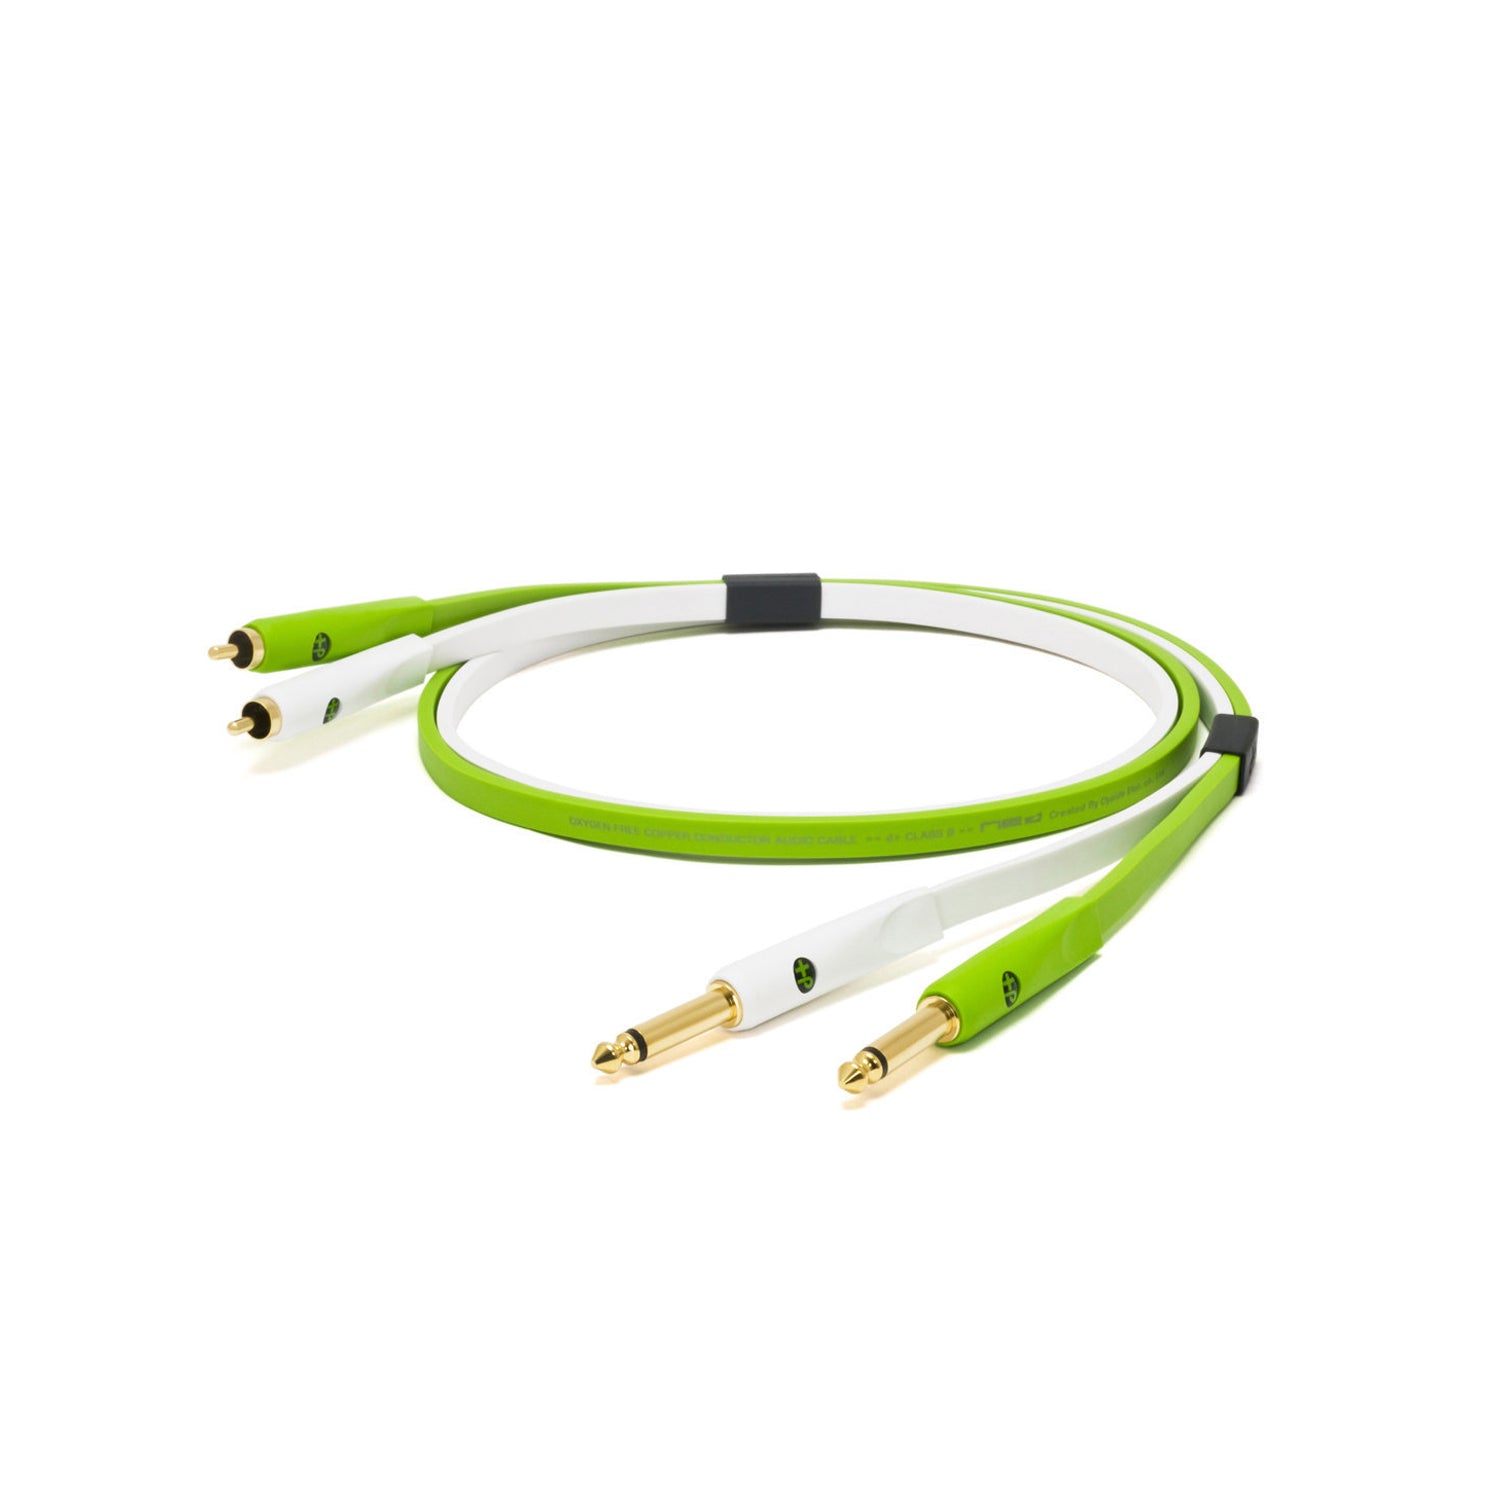 Oyaide NEO d+ Class B RTS Cable